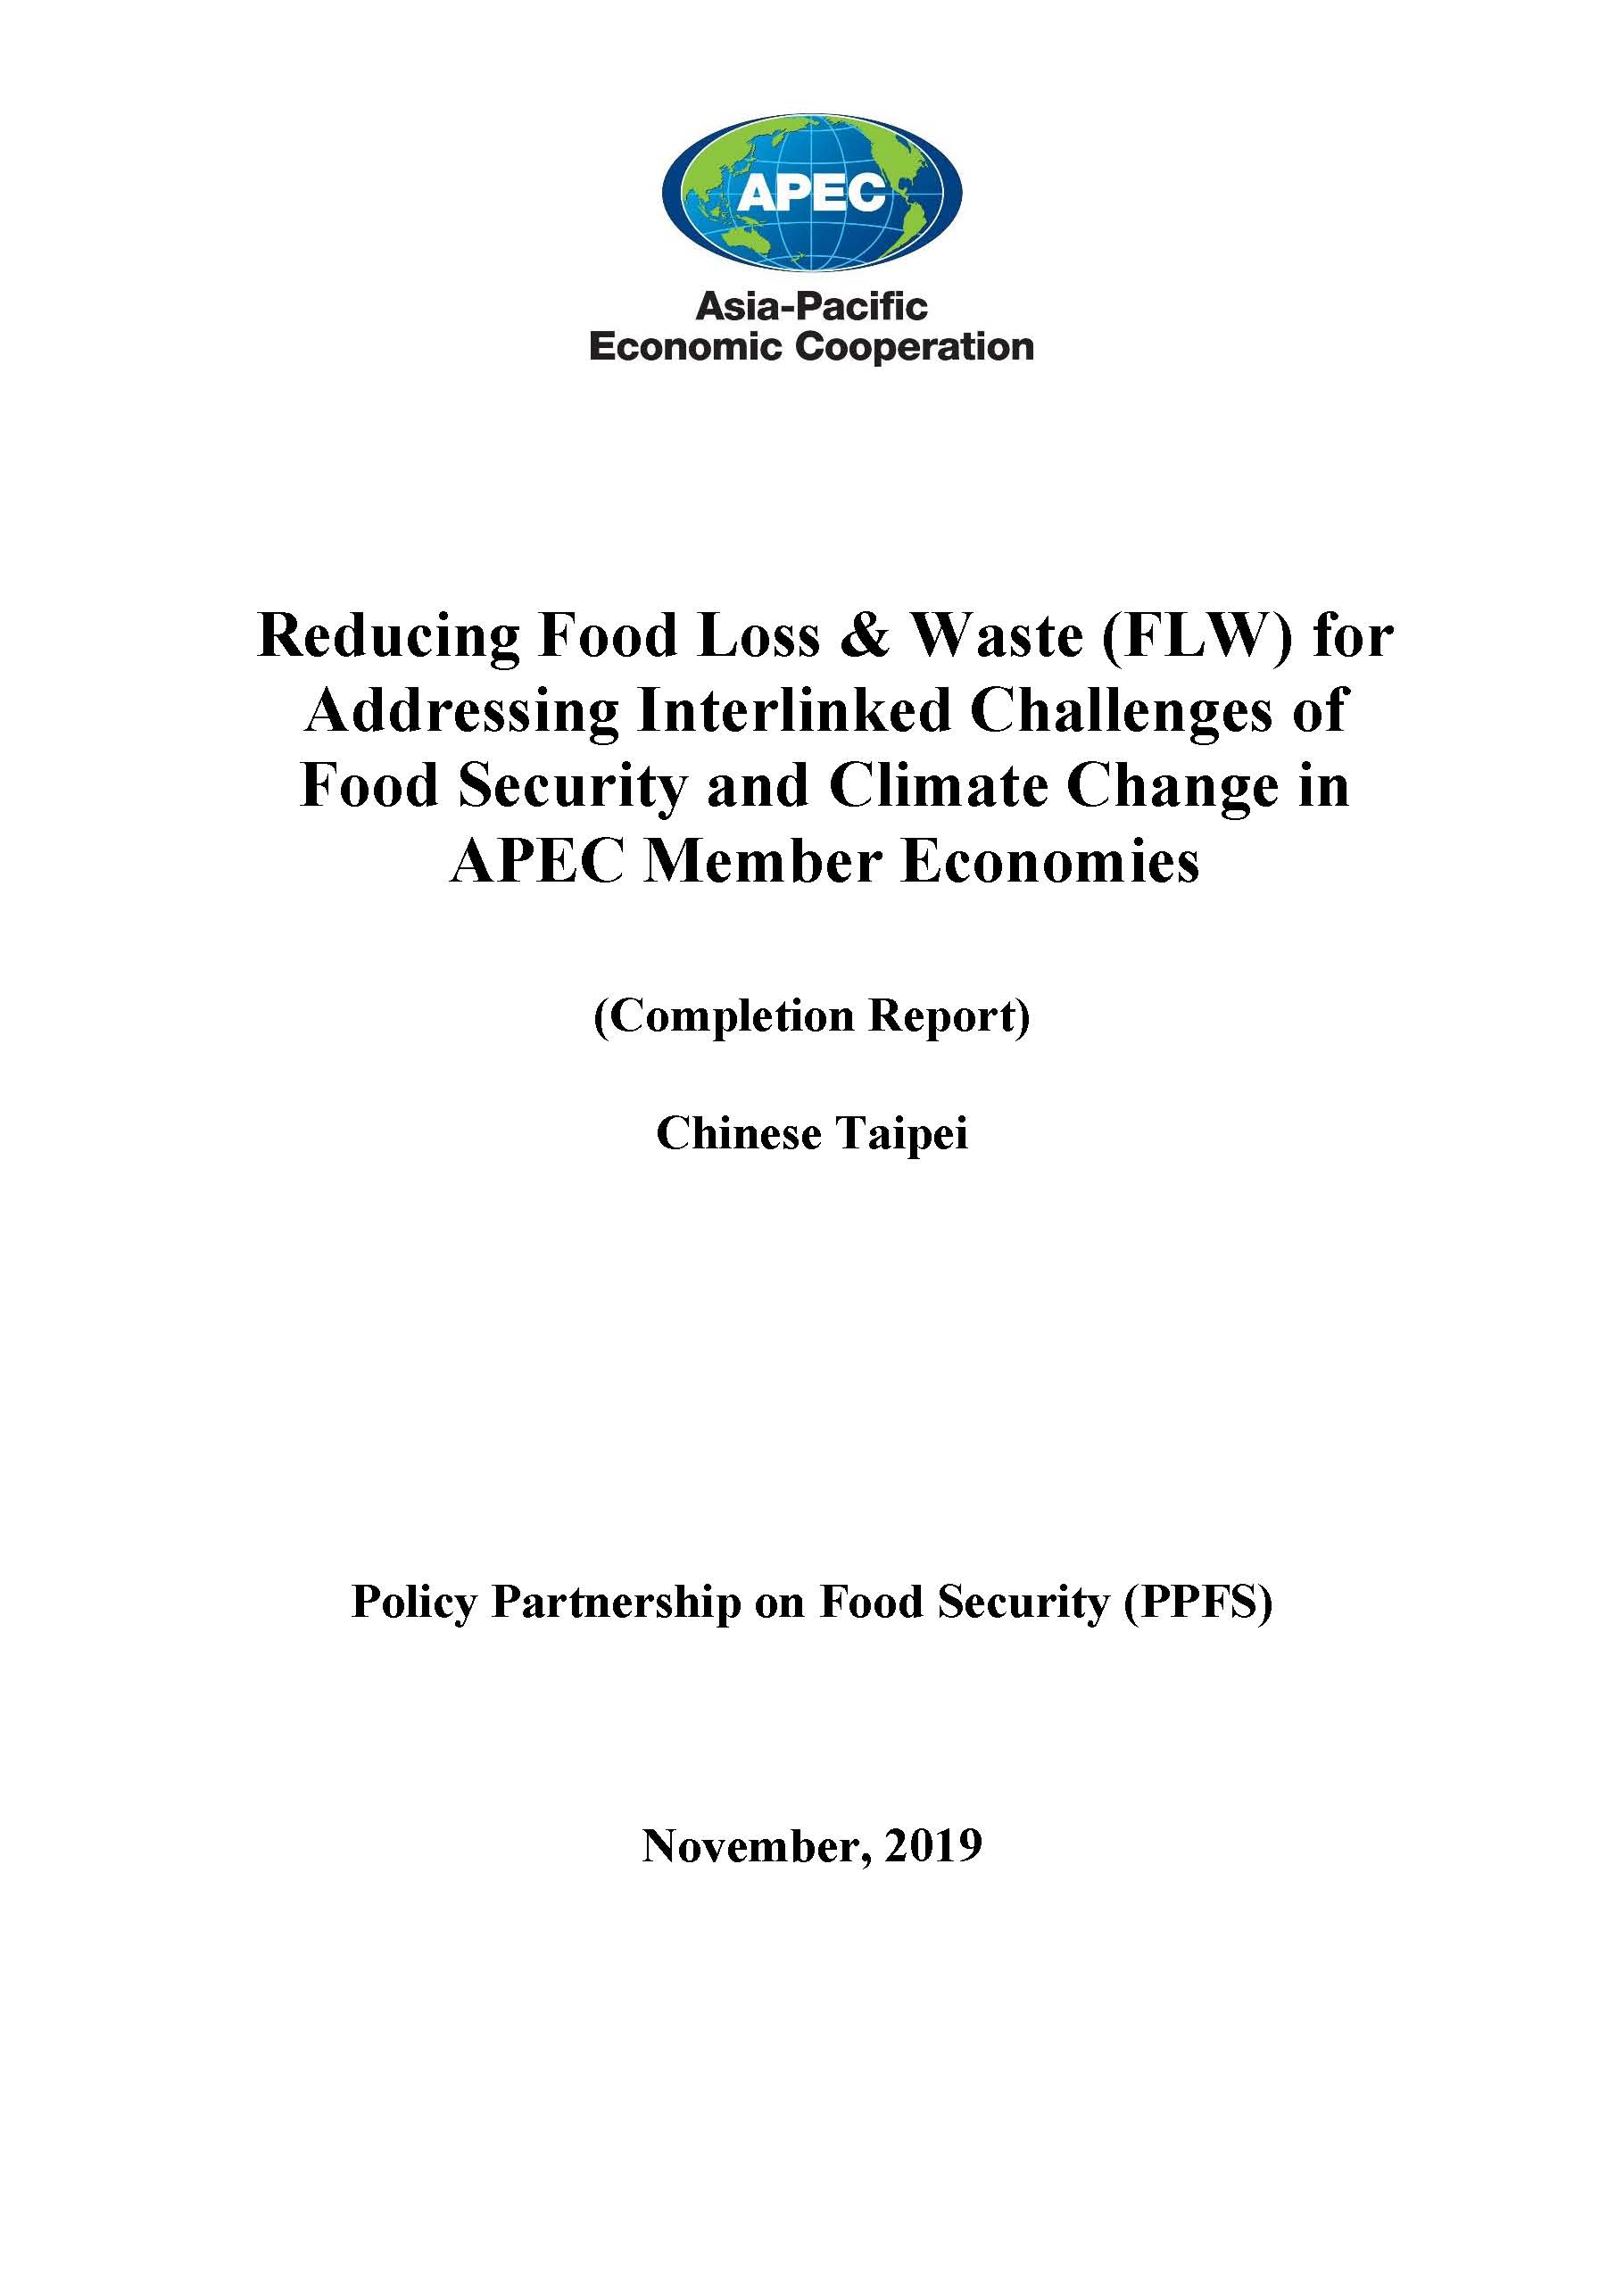 Reducing Food Loss & Waste (FLW) for Addressing Interlinked Challenges of Food Security and Climate Change in APEC Member Economies